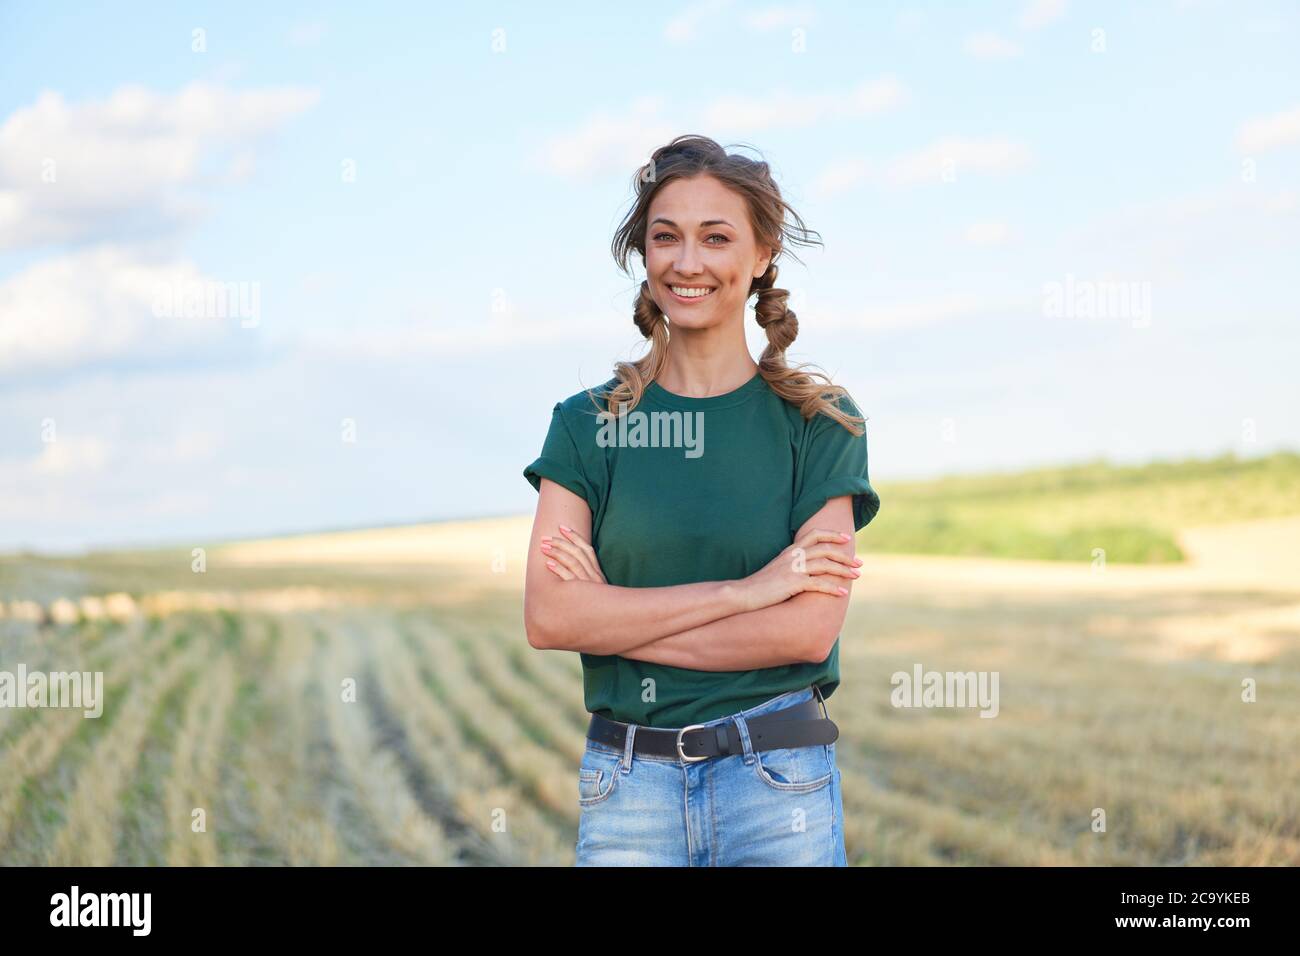 Woman farmer straw hat standing farmland smiling Female agronomist specialist farming agribusiness Happy positive caucasian worker agricultural field Stock Photo